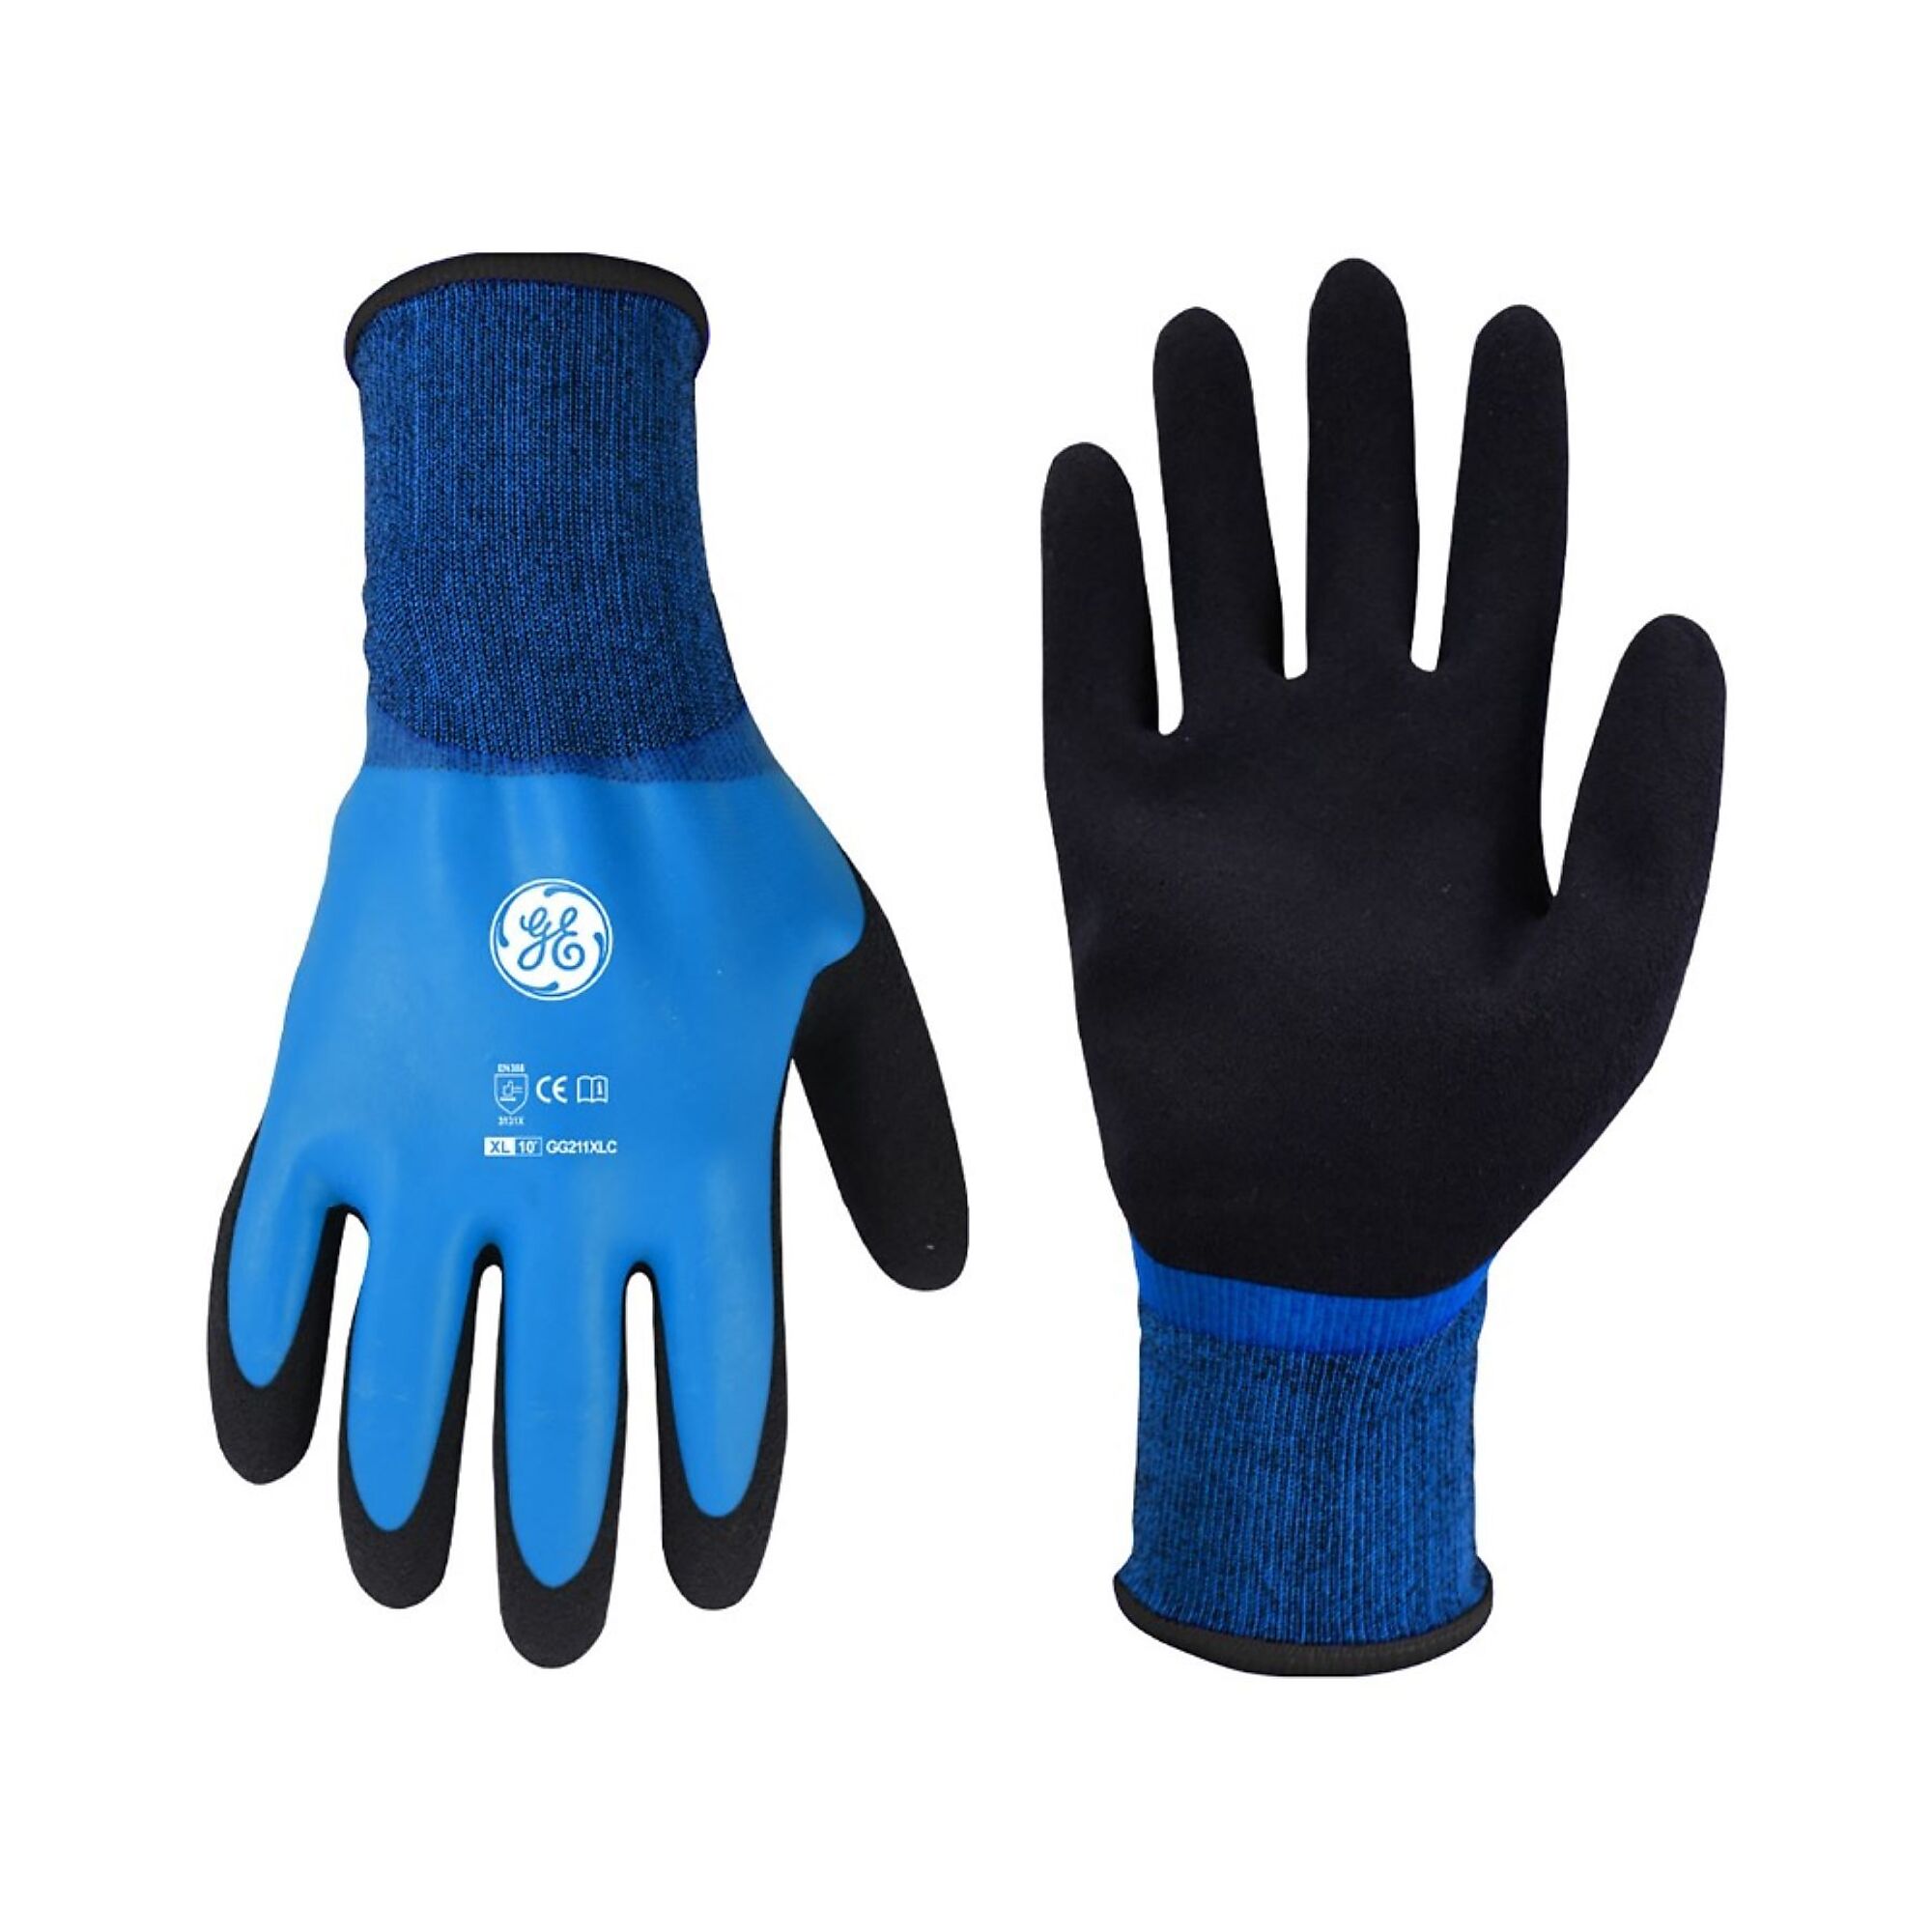 General Electric, Unisex Dipped Gloves Black/Blue XL 12 pair, Size XL, Included (qty.) 12, Model GG211XL